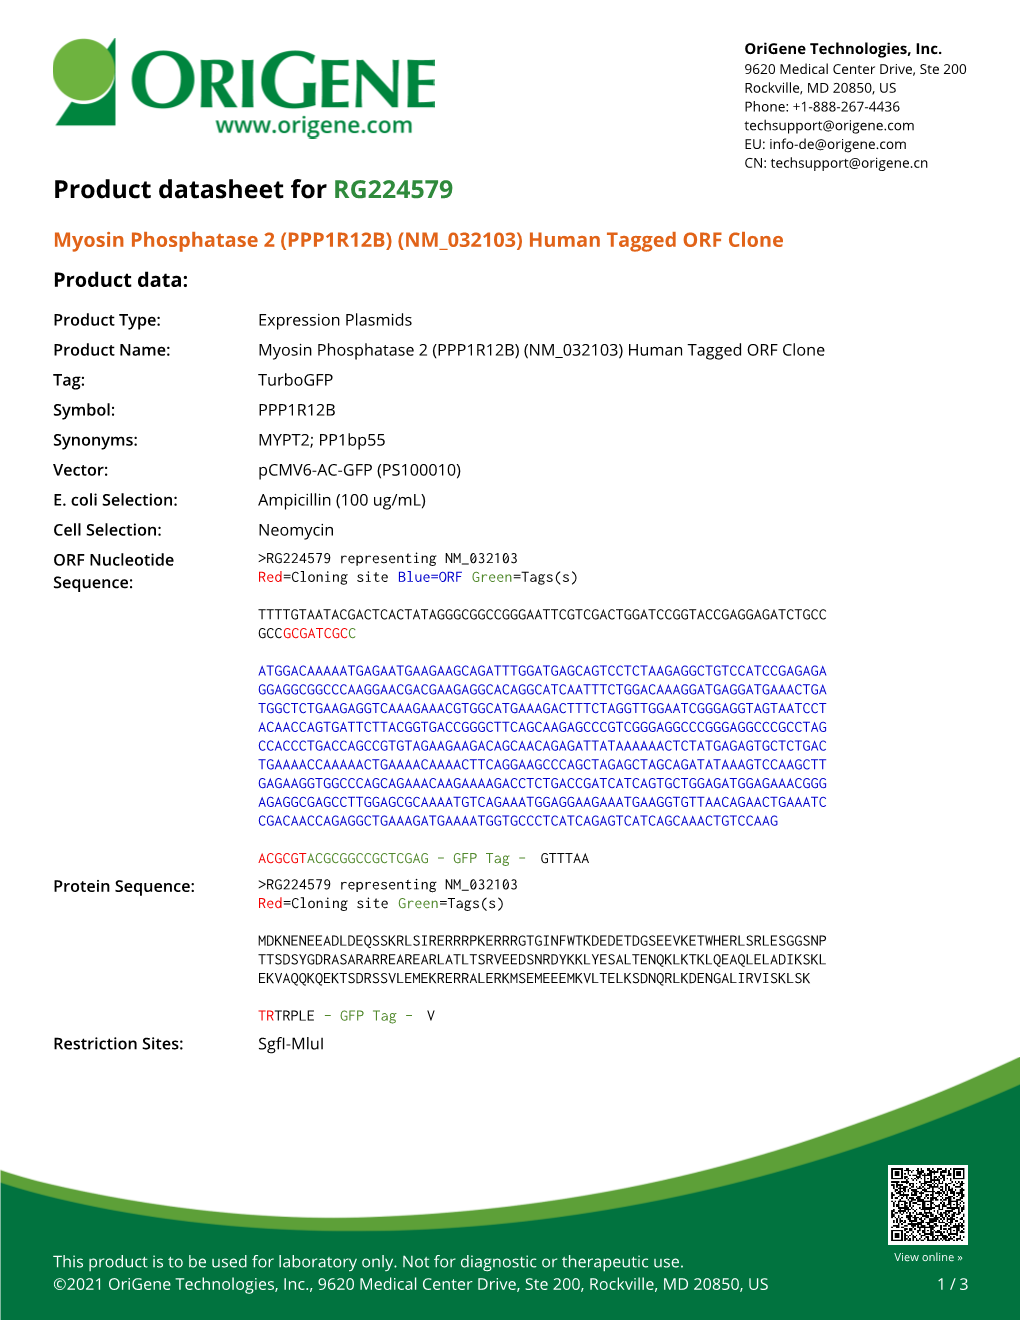 (PPP1R12B) (NM 032103) Human Tagged ORF Clone Product Data